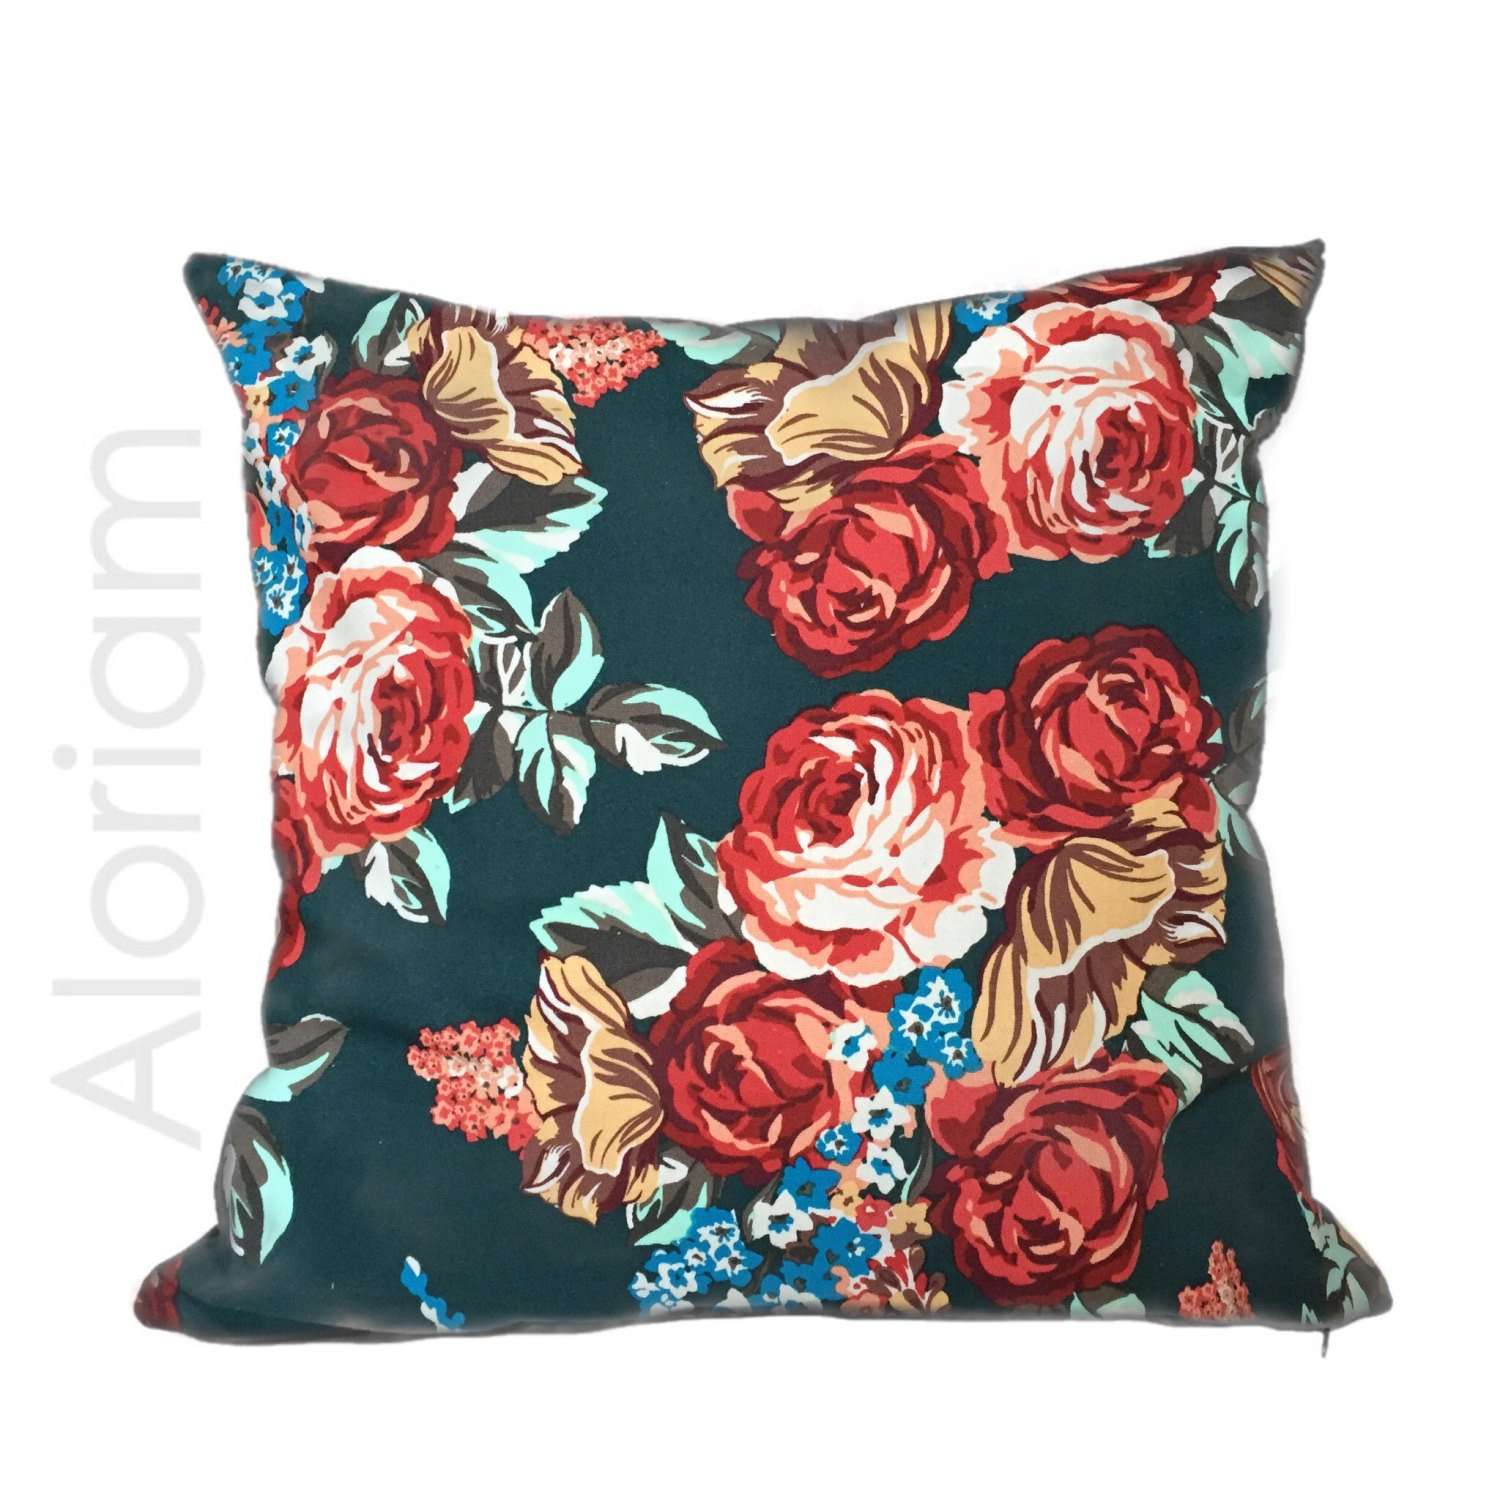 red roses green floral print pillow cushion cover by Aloriam